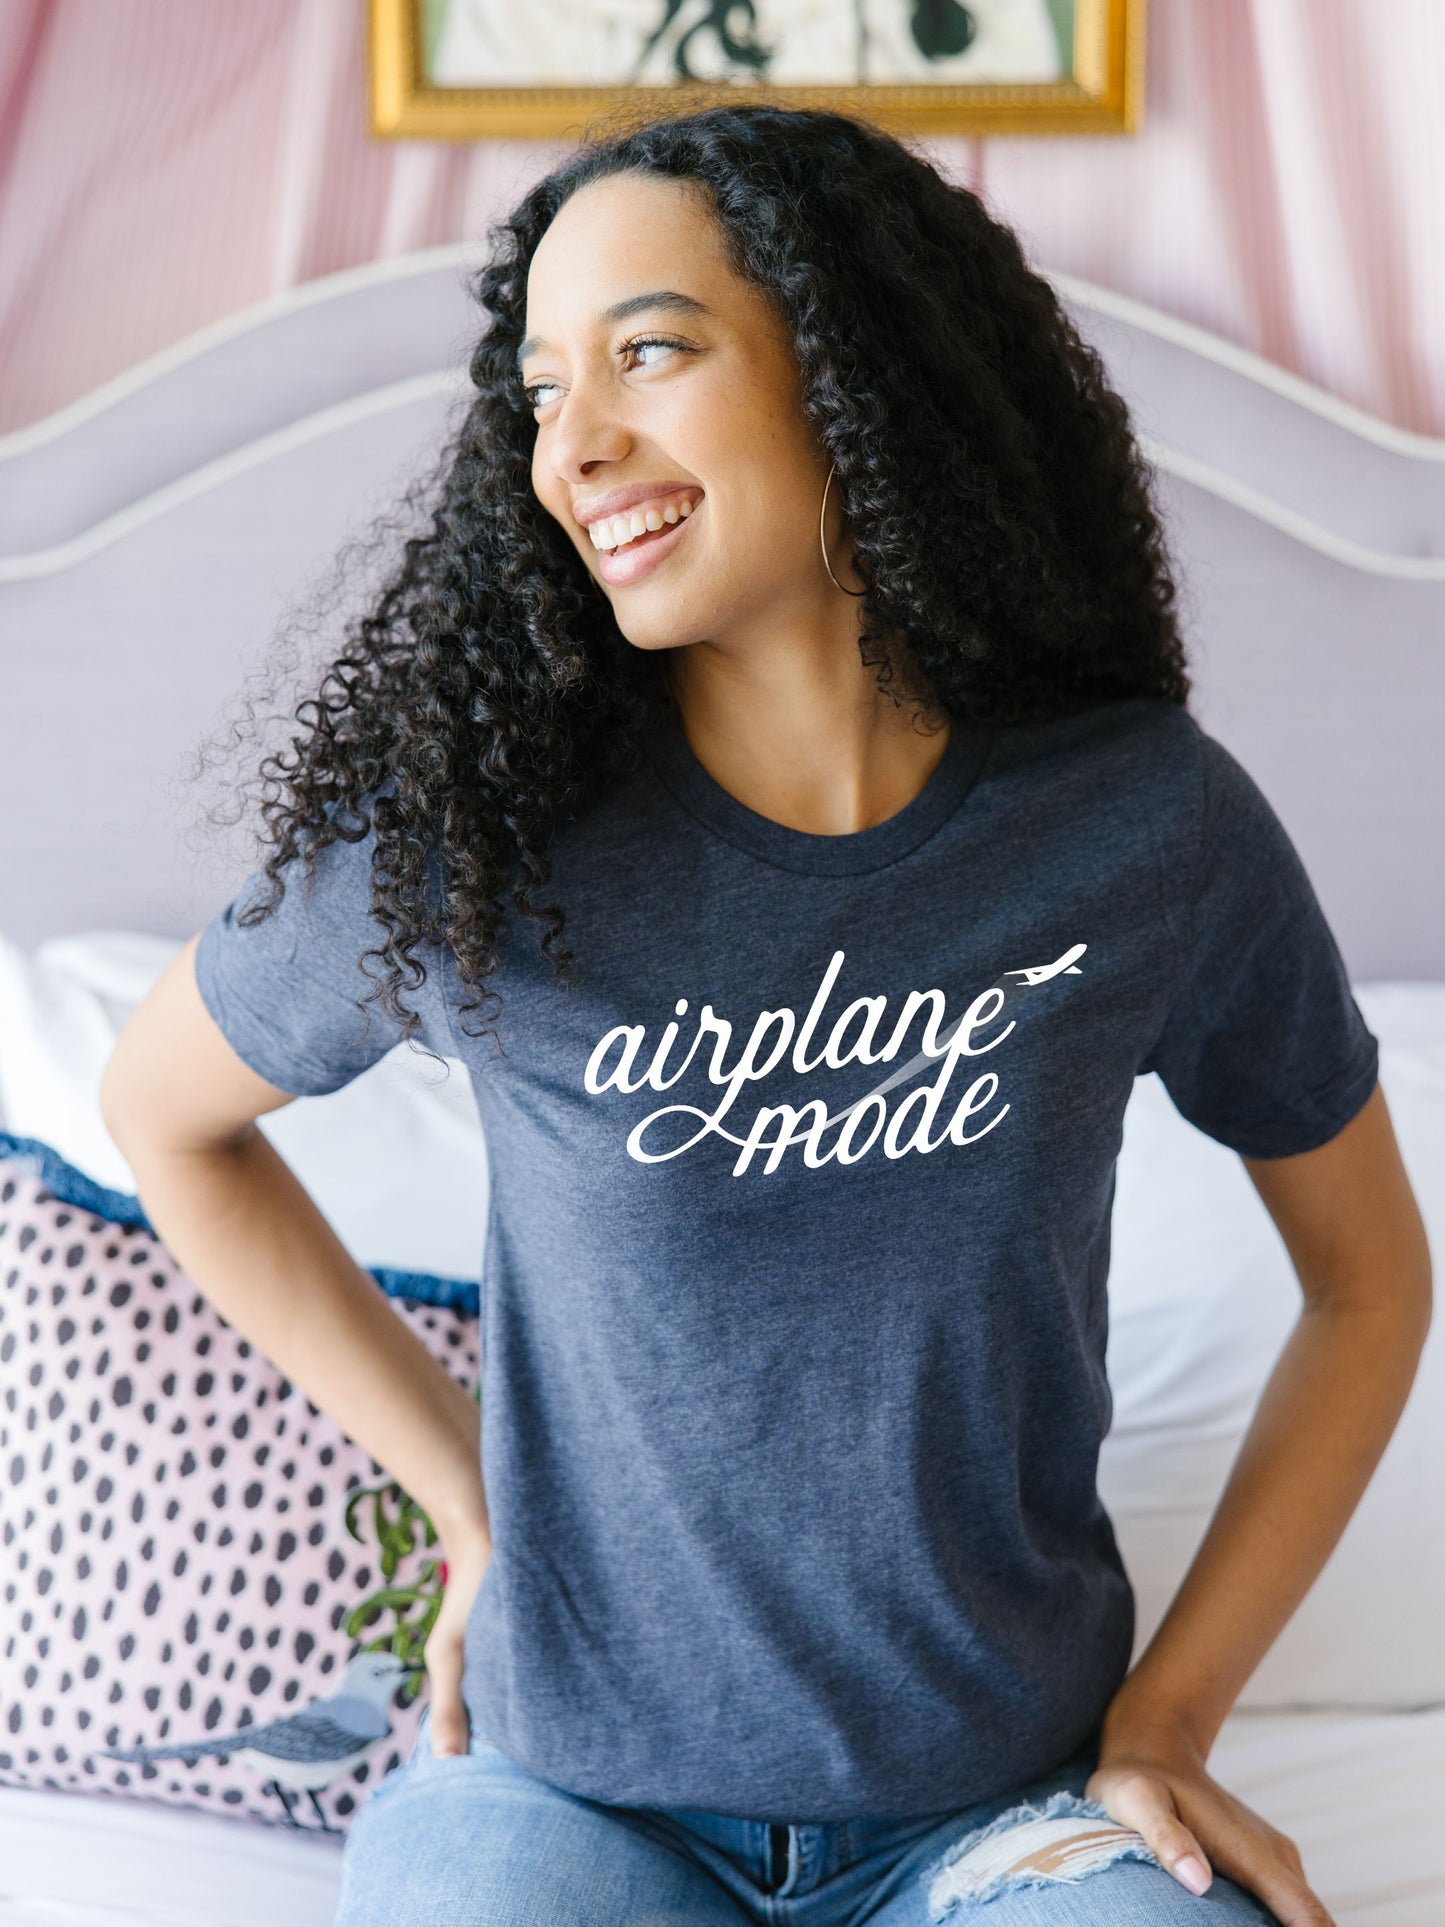 Airplane Mode Shirt in color navy for girls trips and travel days